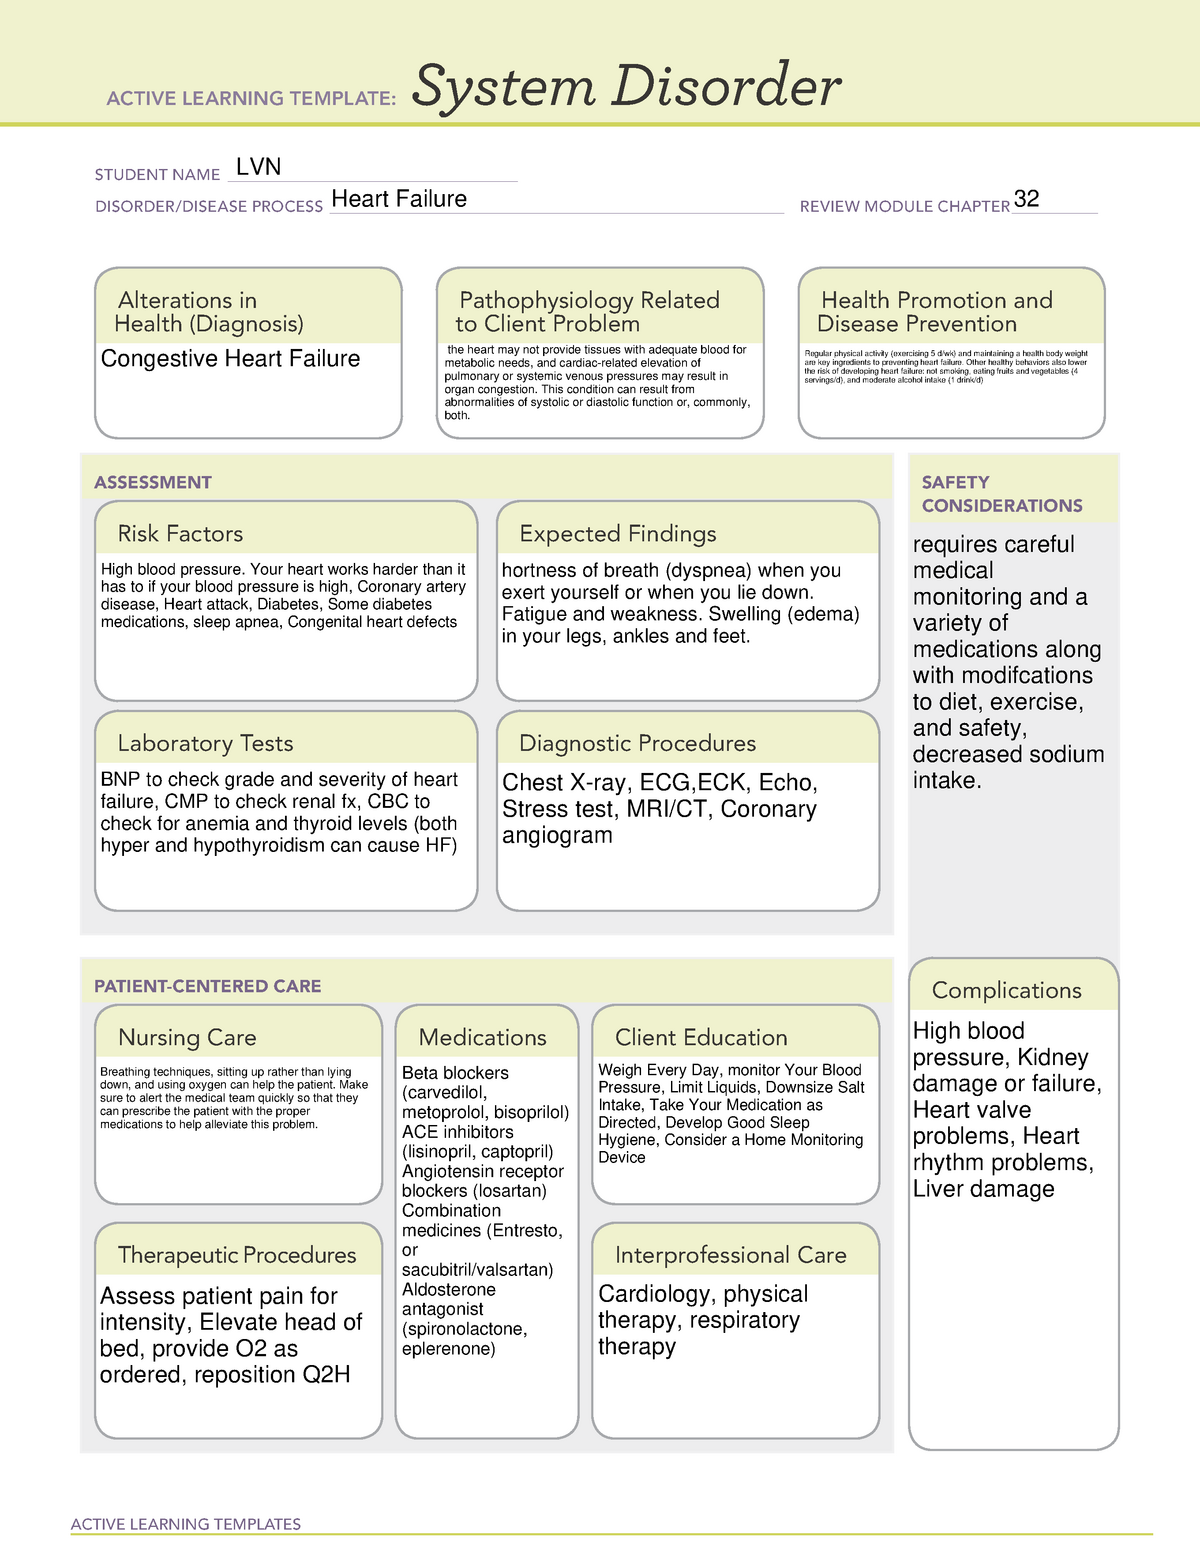 chf-template-active-learning-templates-system-disorder-student-name